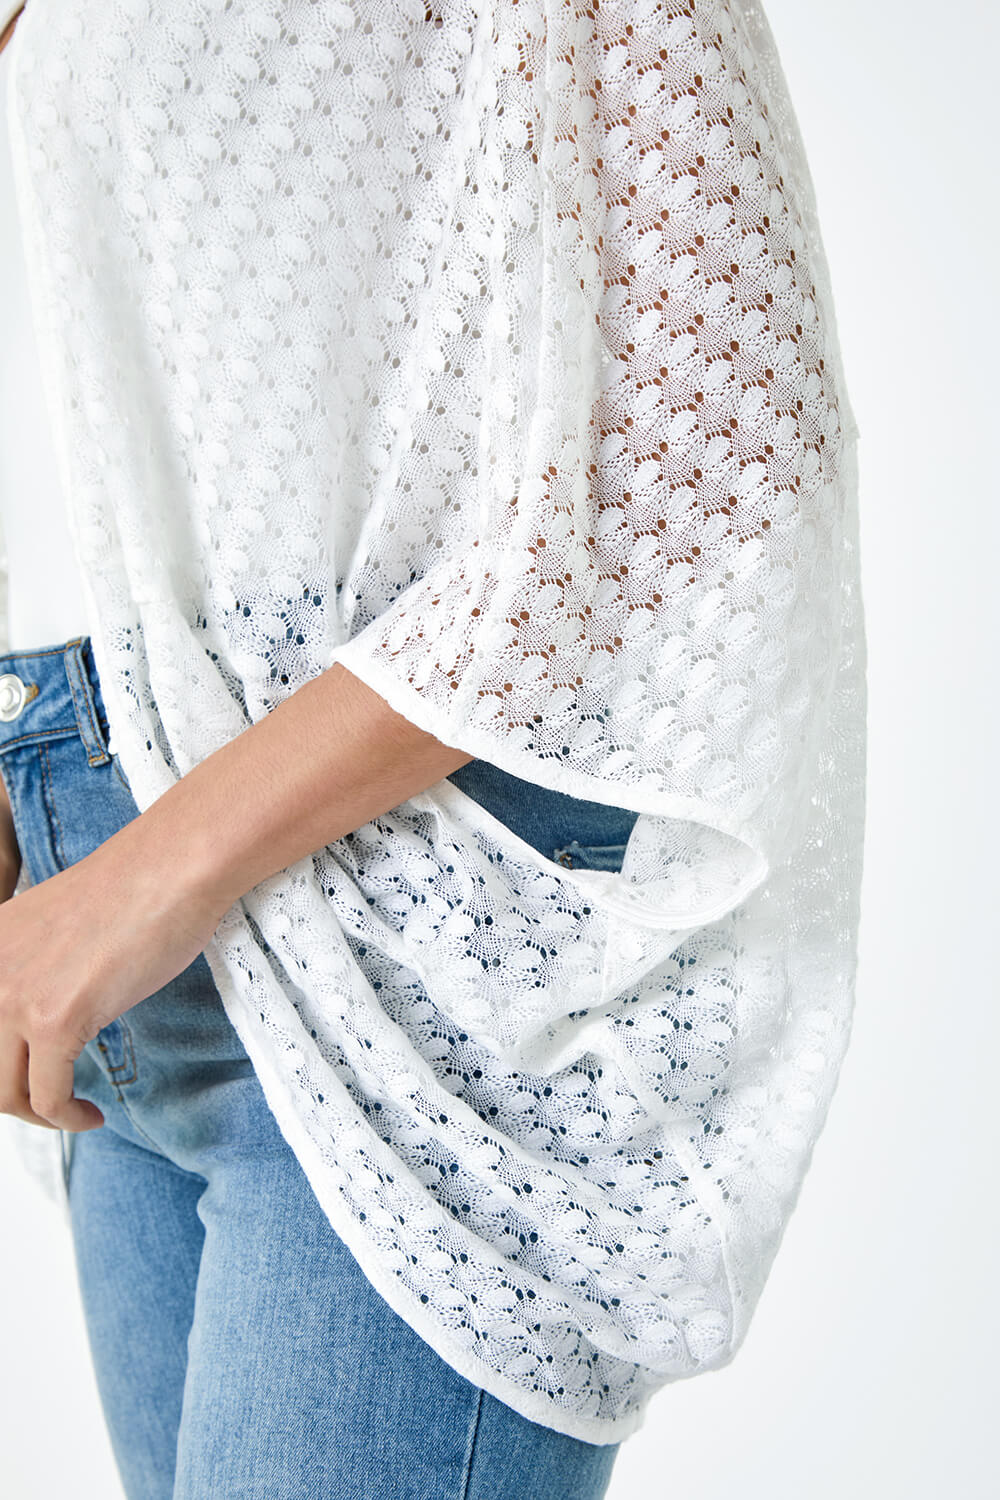 White Textured Knit Cardigan Cover Up, Image 5 of 5